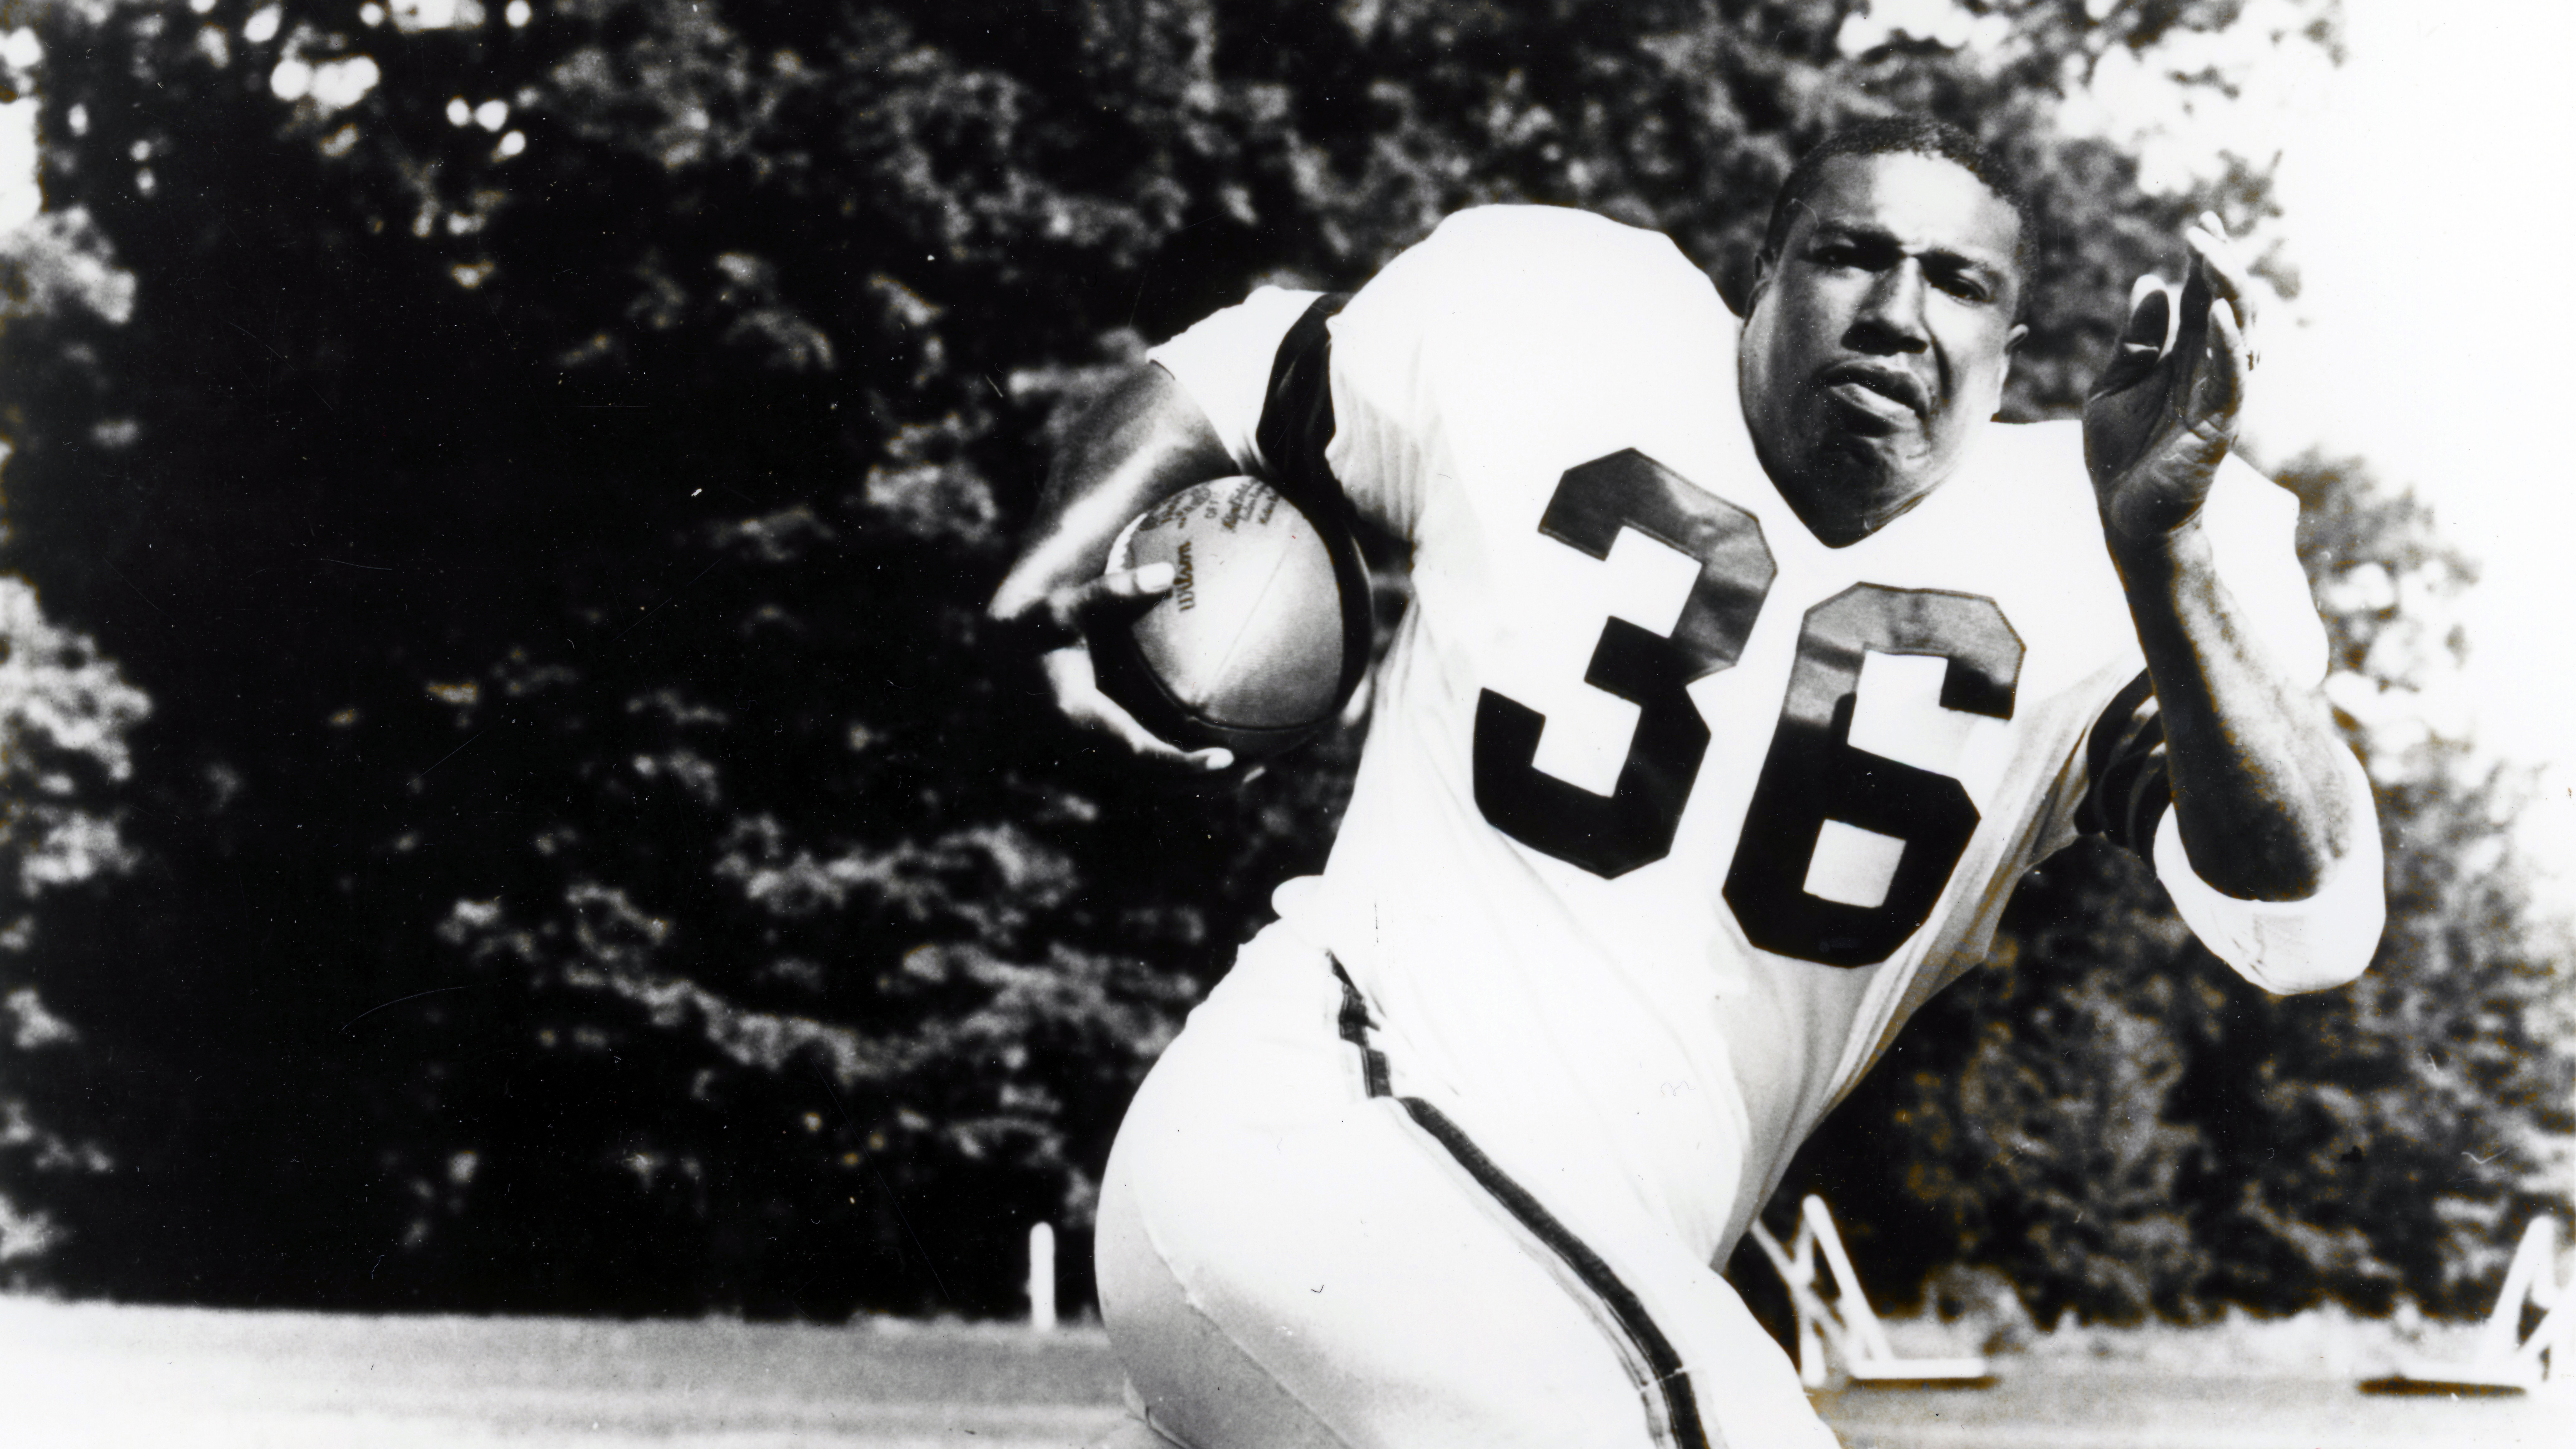 Marion Motley (June 5, 1920 - June 27, 1999) was one of the first Black men to play professional football